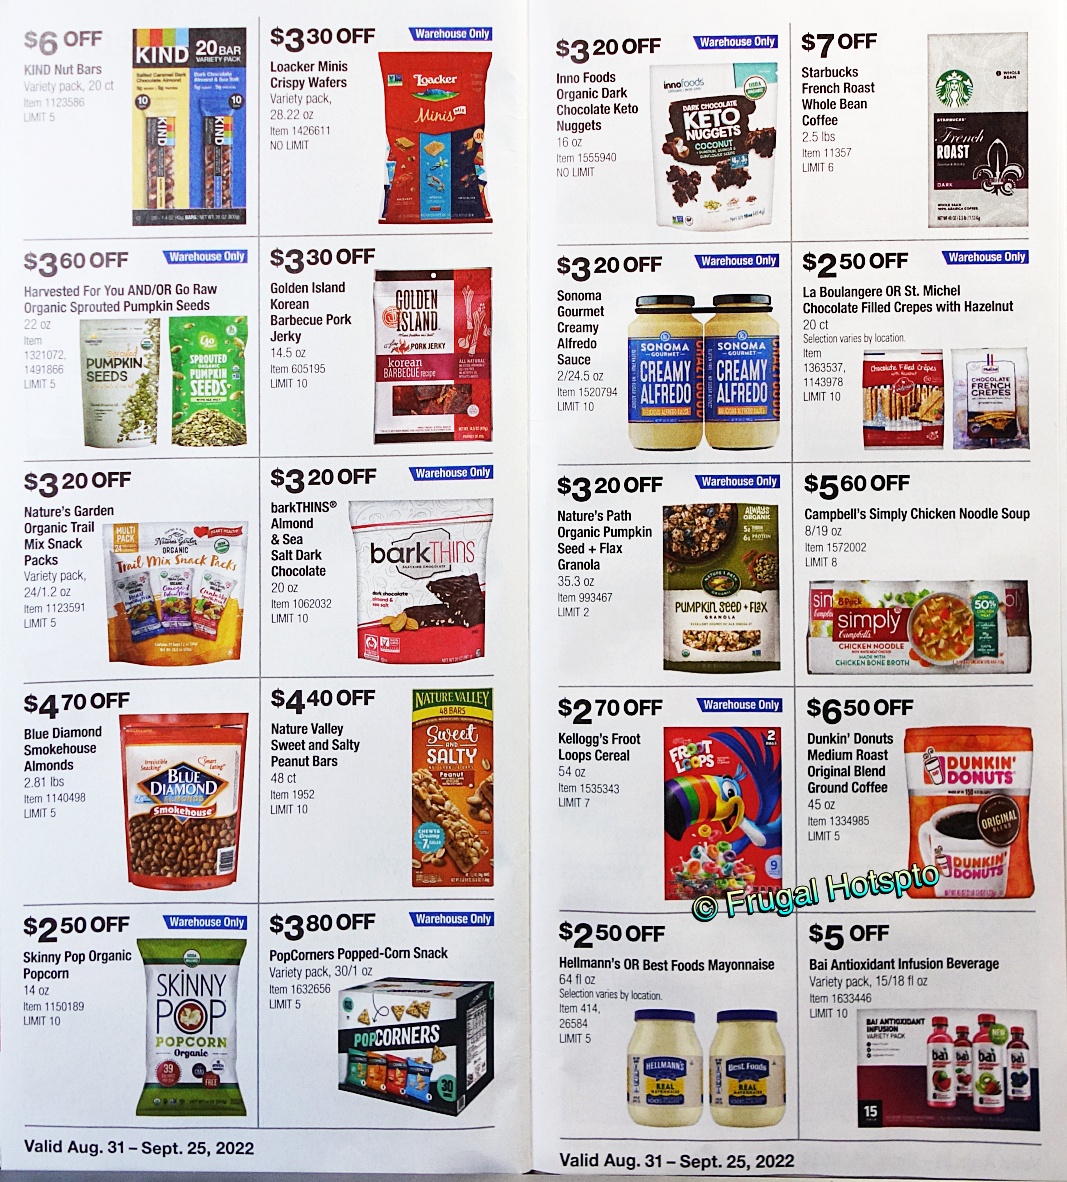 Costco Coupon Book SEPTEMBER 2022 | P 18 and 19